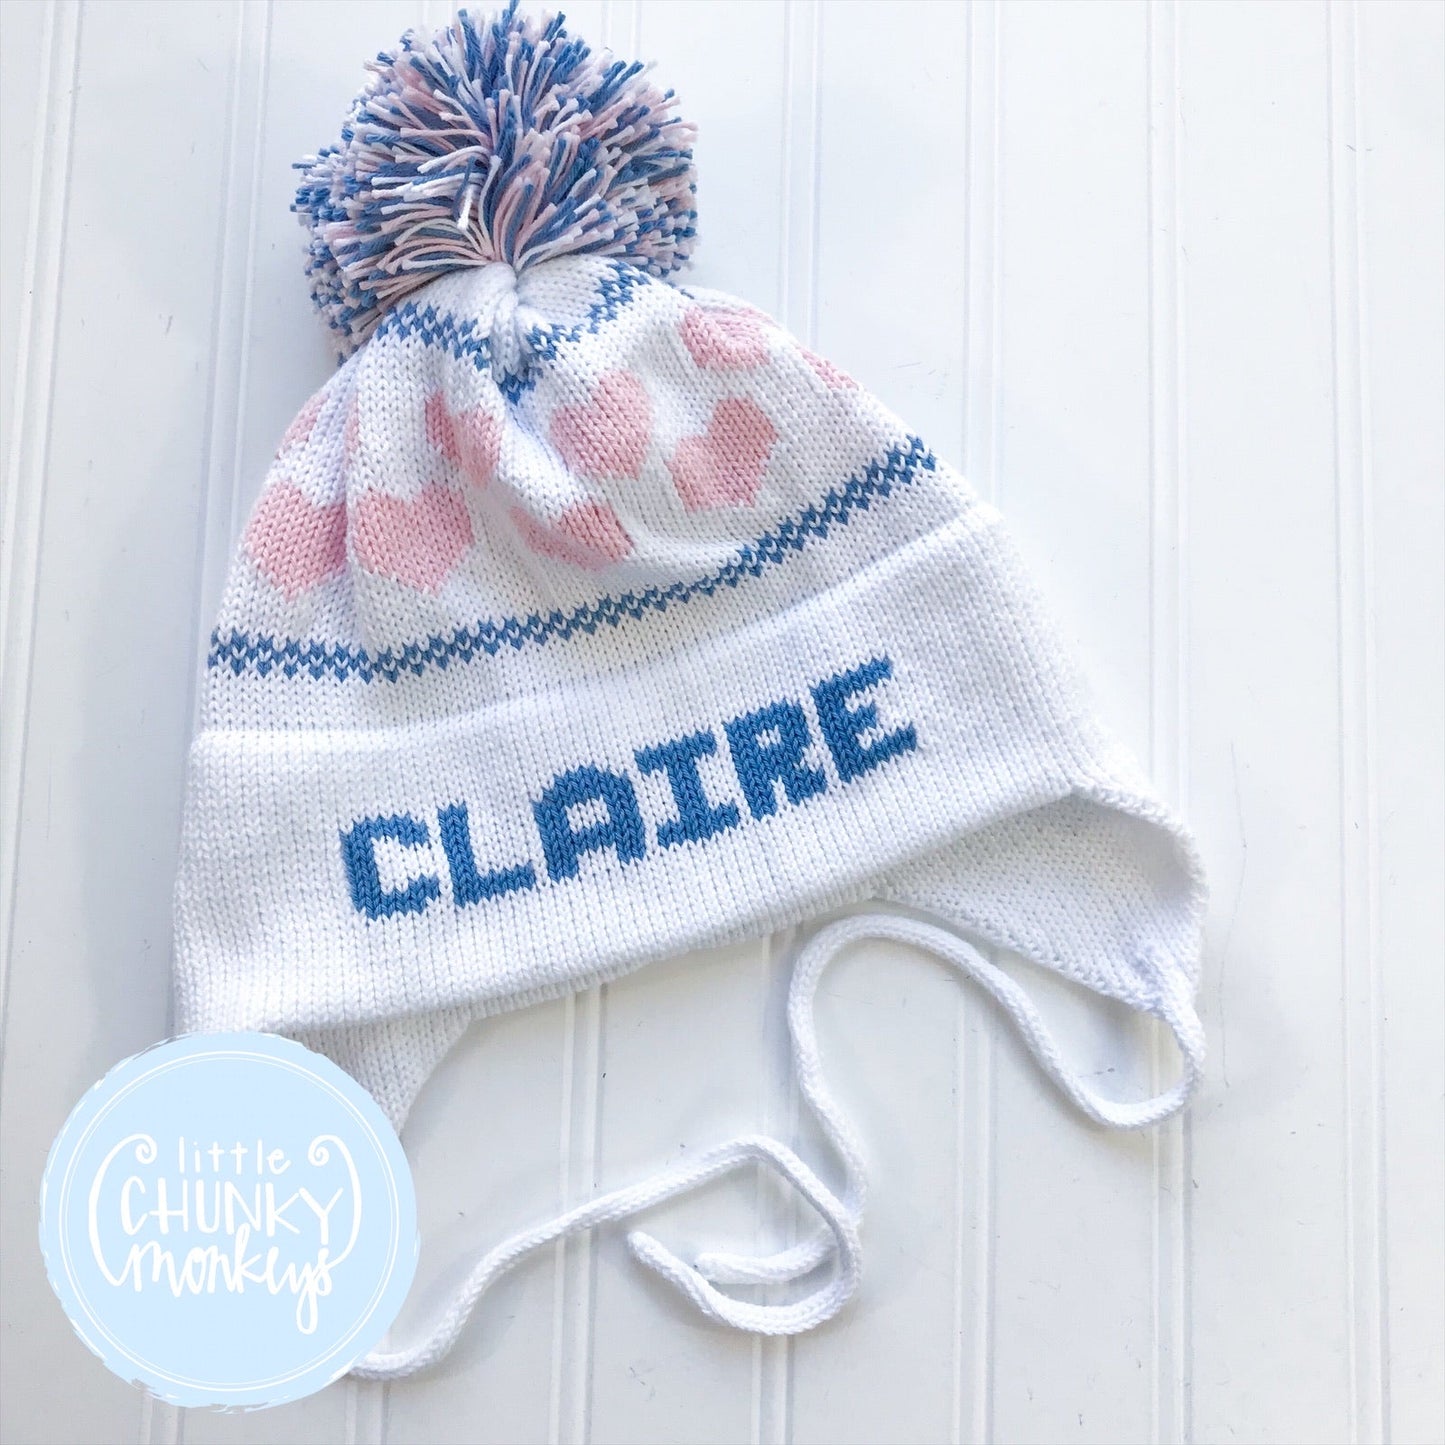 Ready to Ship - Custom Knit Heart Hat - White, Denim & Light Pink - "CLAIRE" Size Toddler (2-4/5Y)